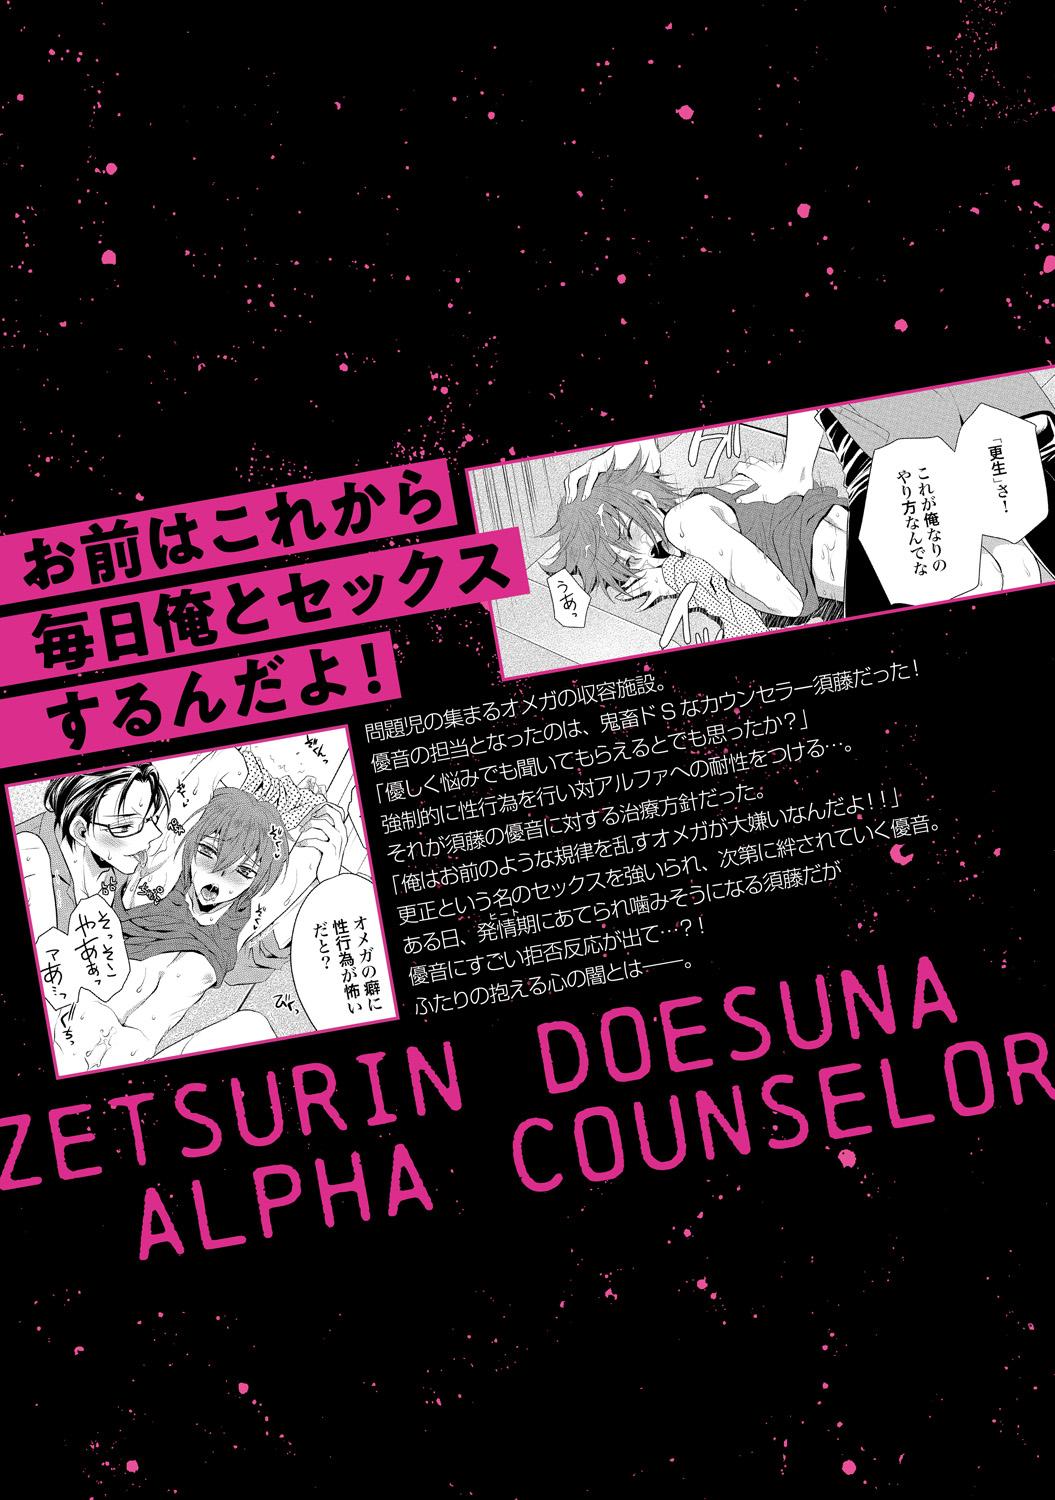 Gay Kissing Zetsurin doesuna α counselor Longhair - Page 164